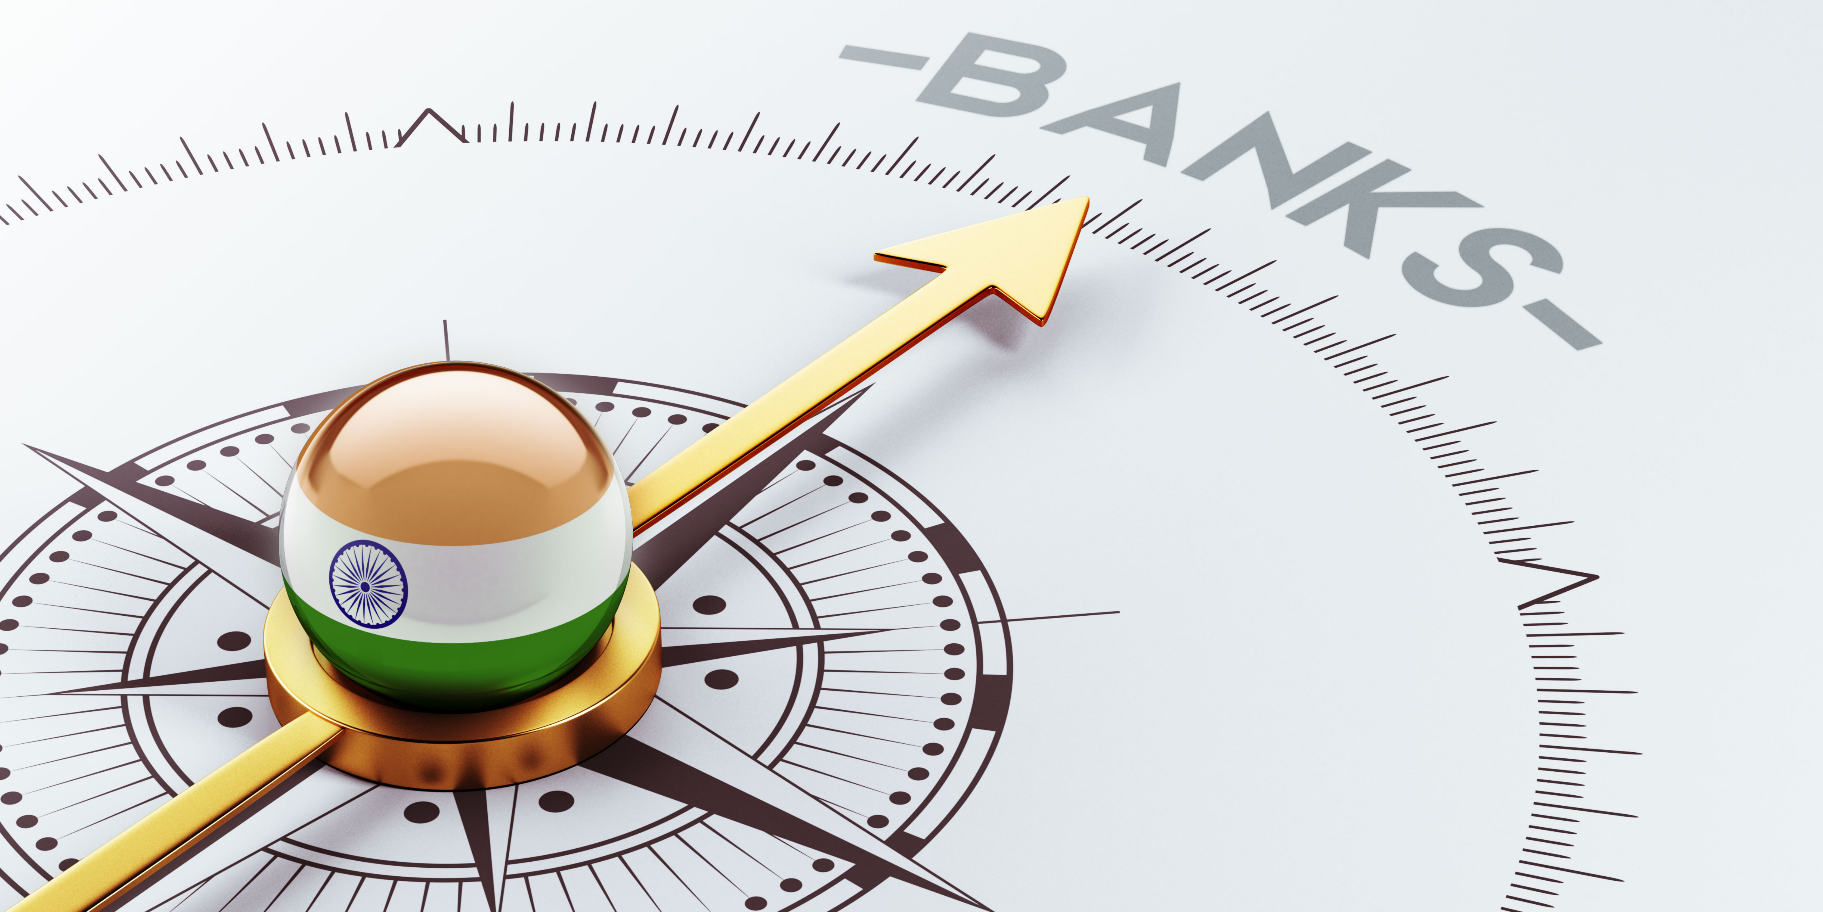 Reserve Bank Of India Releases Discussion Paper On Expected Loss– Based Approach For Loan Loss Provisioning By Banks